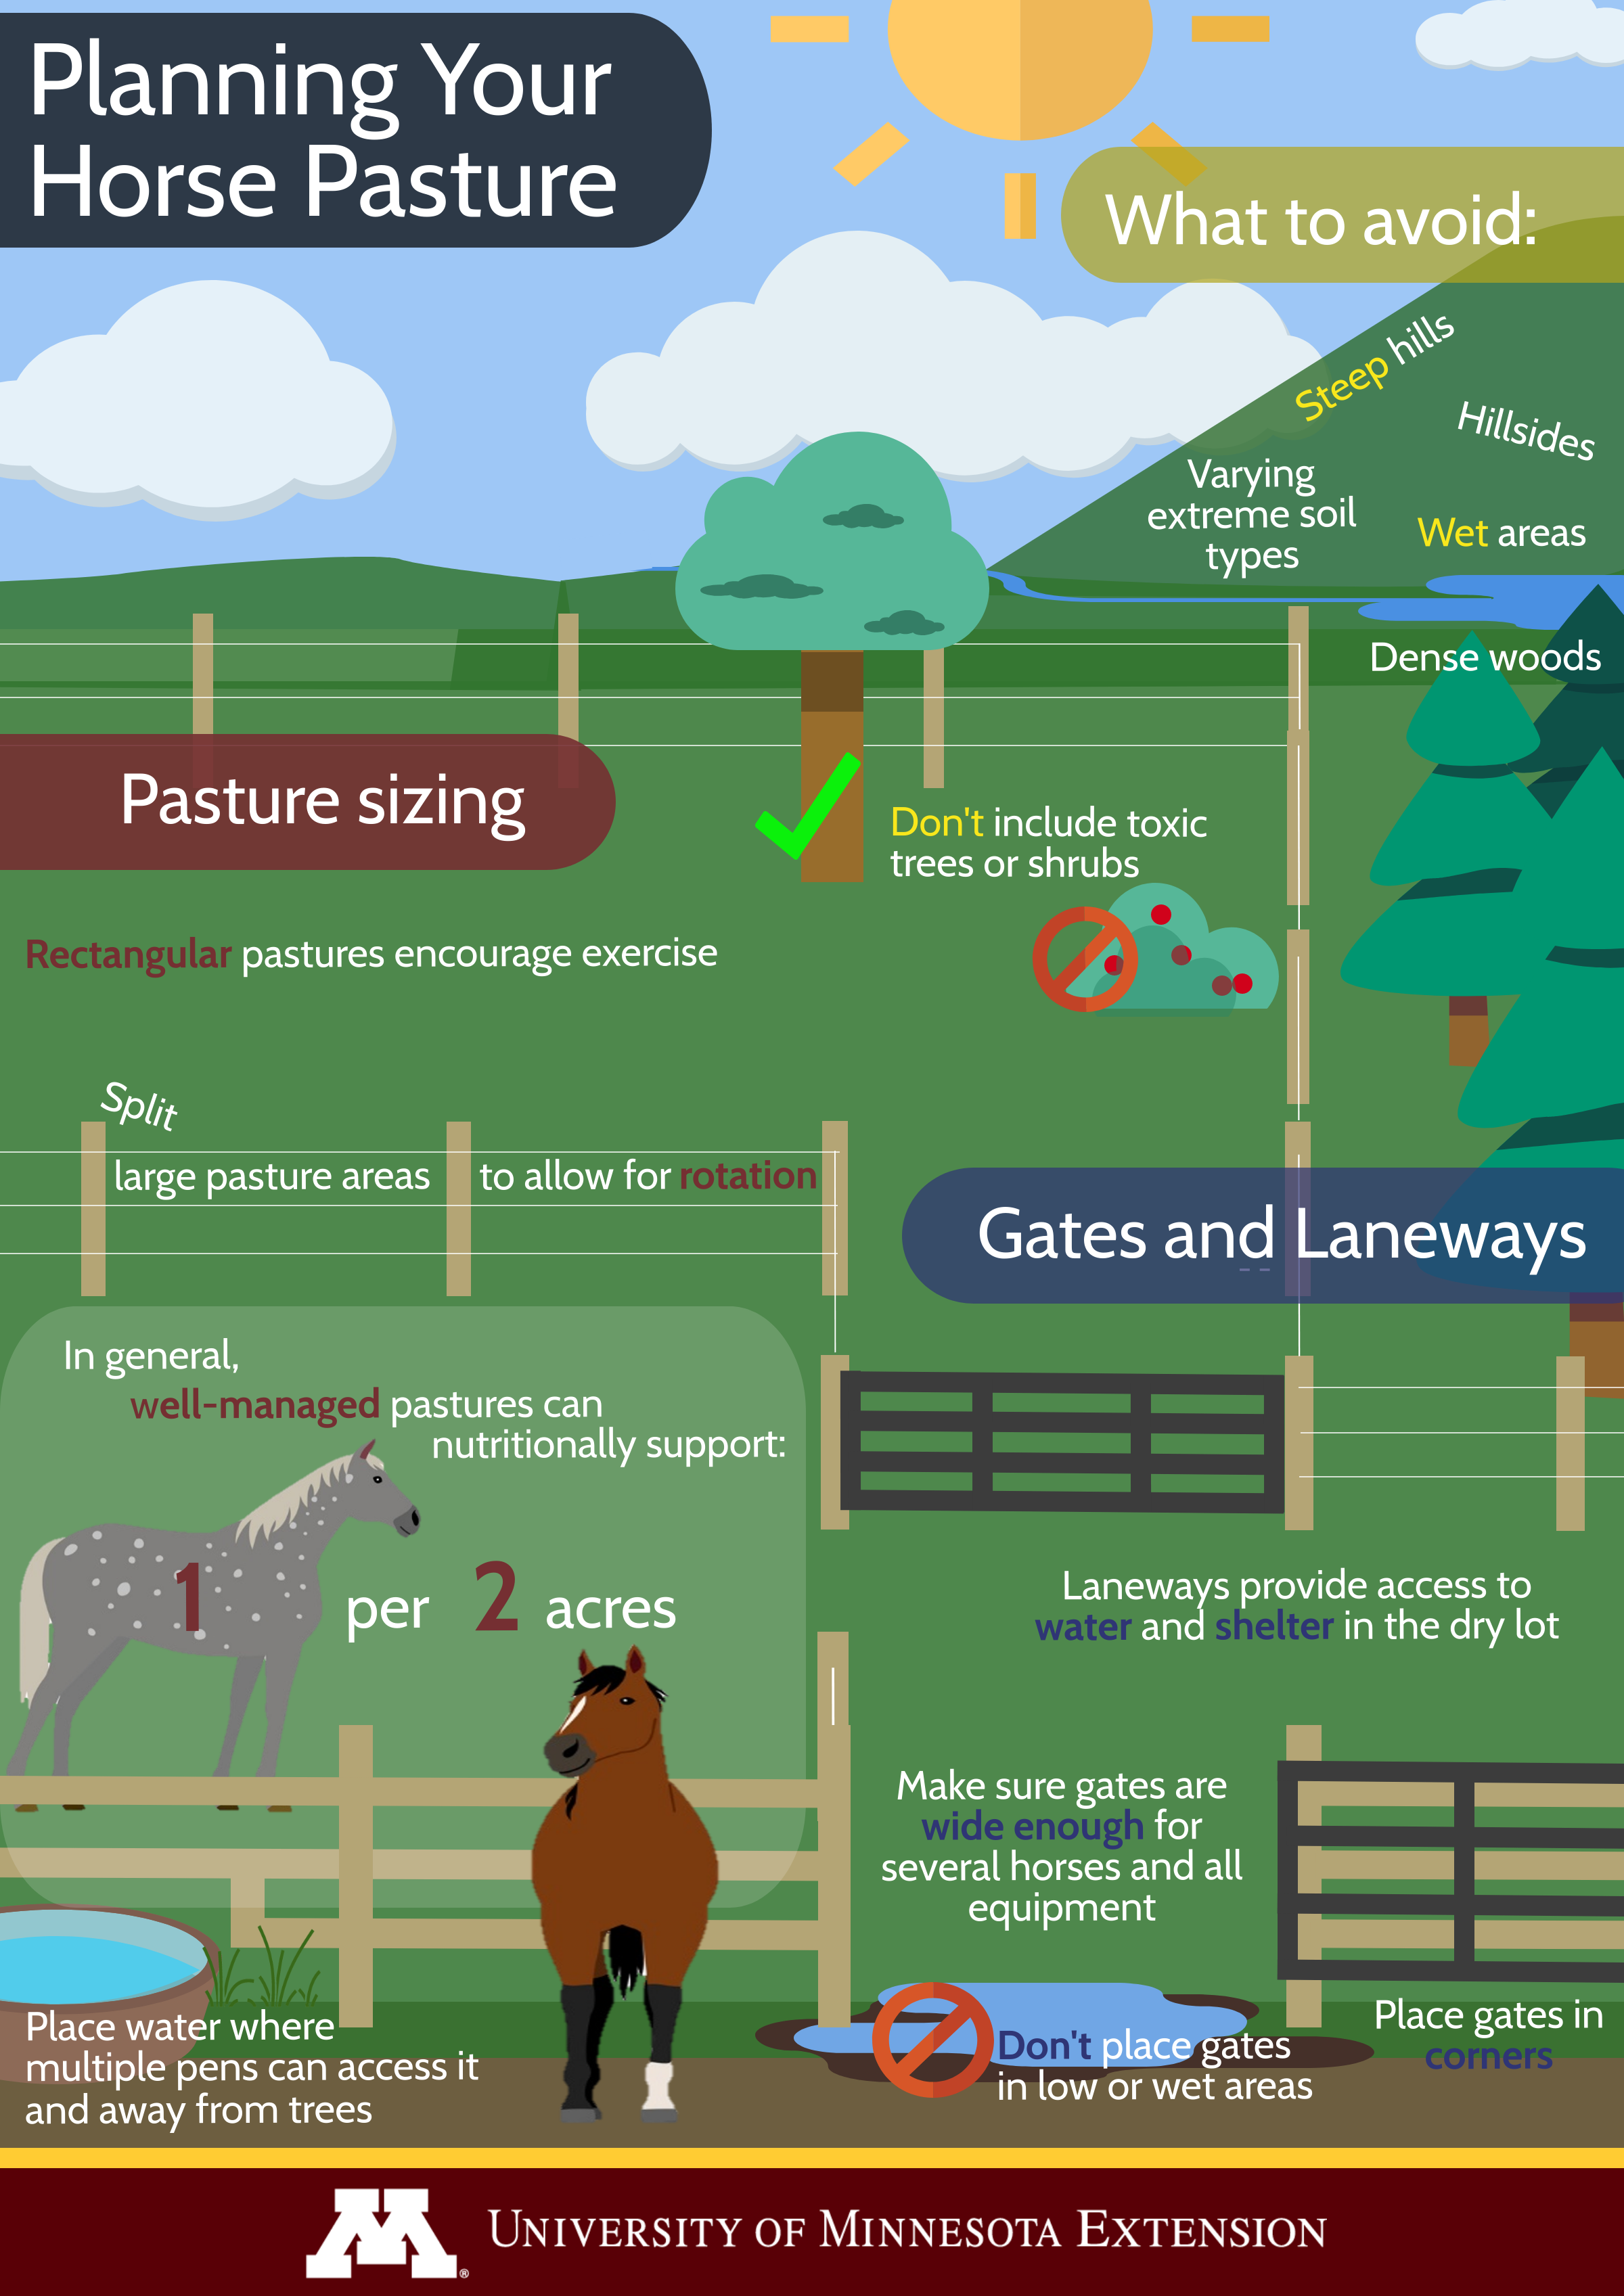 Planning Your Horse Pasture